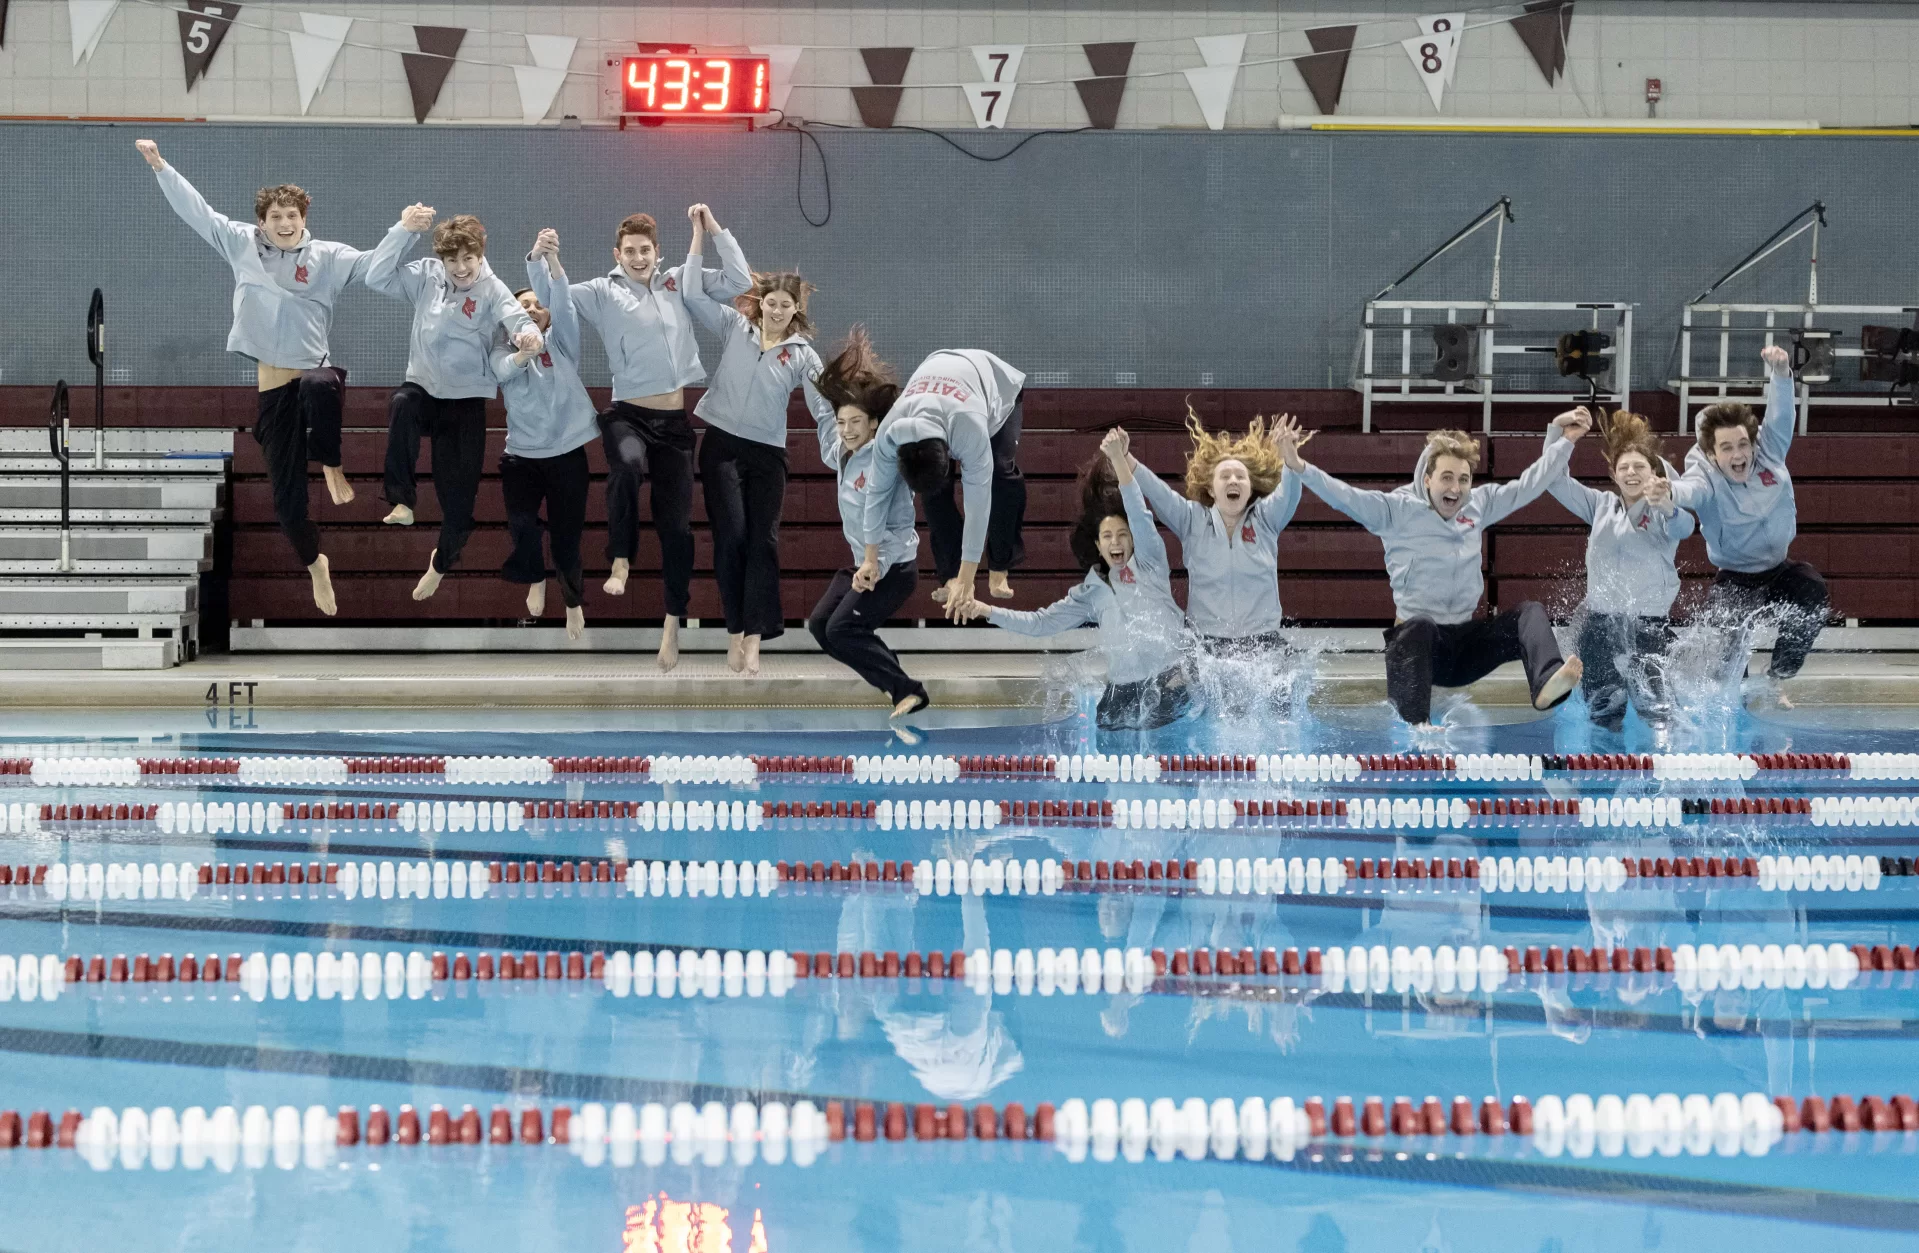 Twelve of thirteen Bates swimmers who are headed to NCAA Championships later in March pose for photos in Merrill’s Tarbell Pool on. March 4, 2023.

They 13 are as follows BUT Emily Kalvaitis was not able to attend the photo session, so only  12 appear in these images: Mark Gregory, Max Cory, Nate Pierce, John Weigel, Tim Johnson, Marrich Somridhivej, Grace Wenger, Sophie Cassily, Stephanie Tropper, Natalie Young, Emily Kalvaitis, Margie Mcleod, and Sarah Palmer.